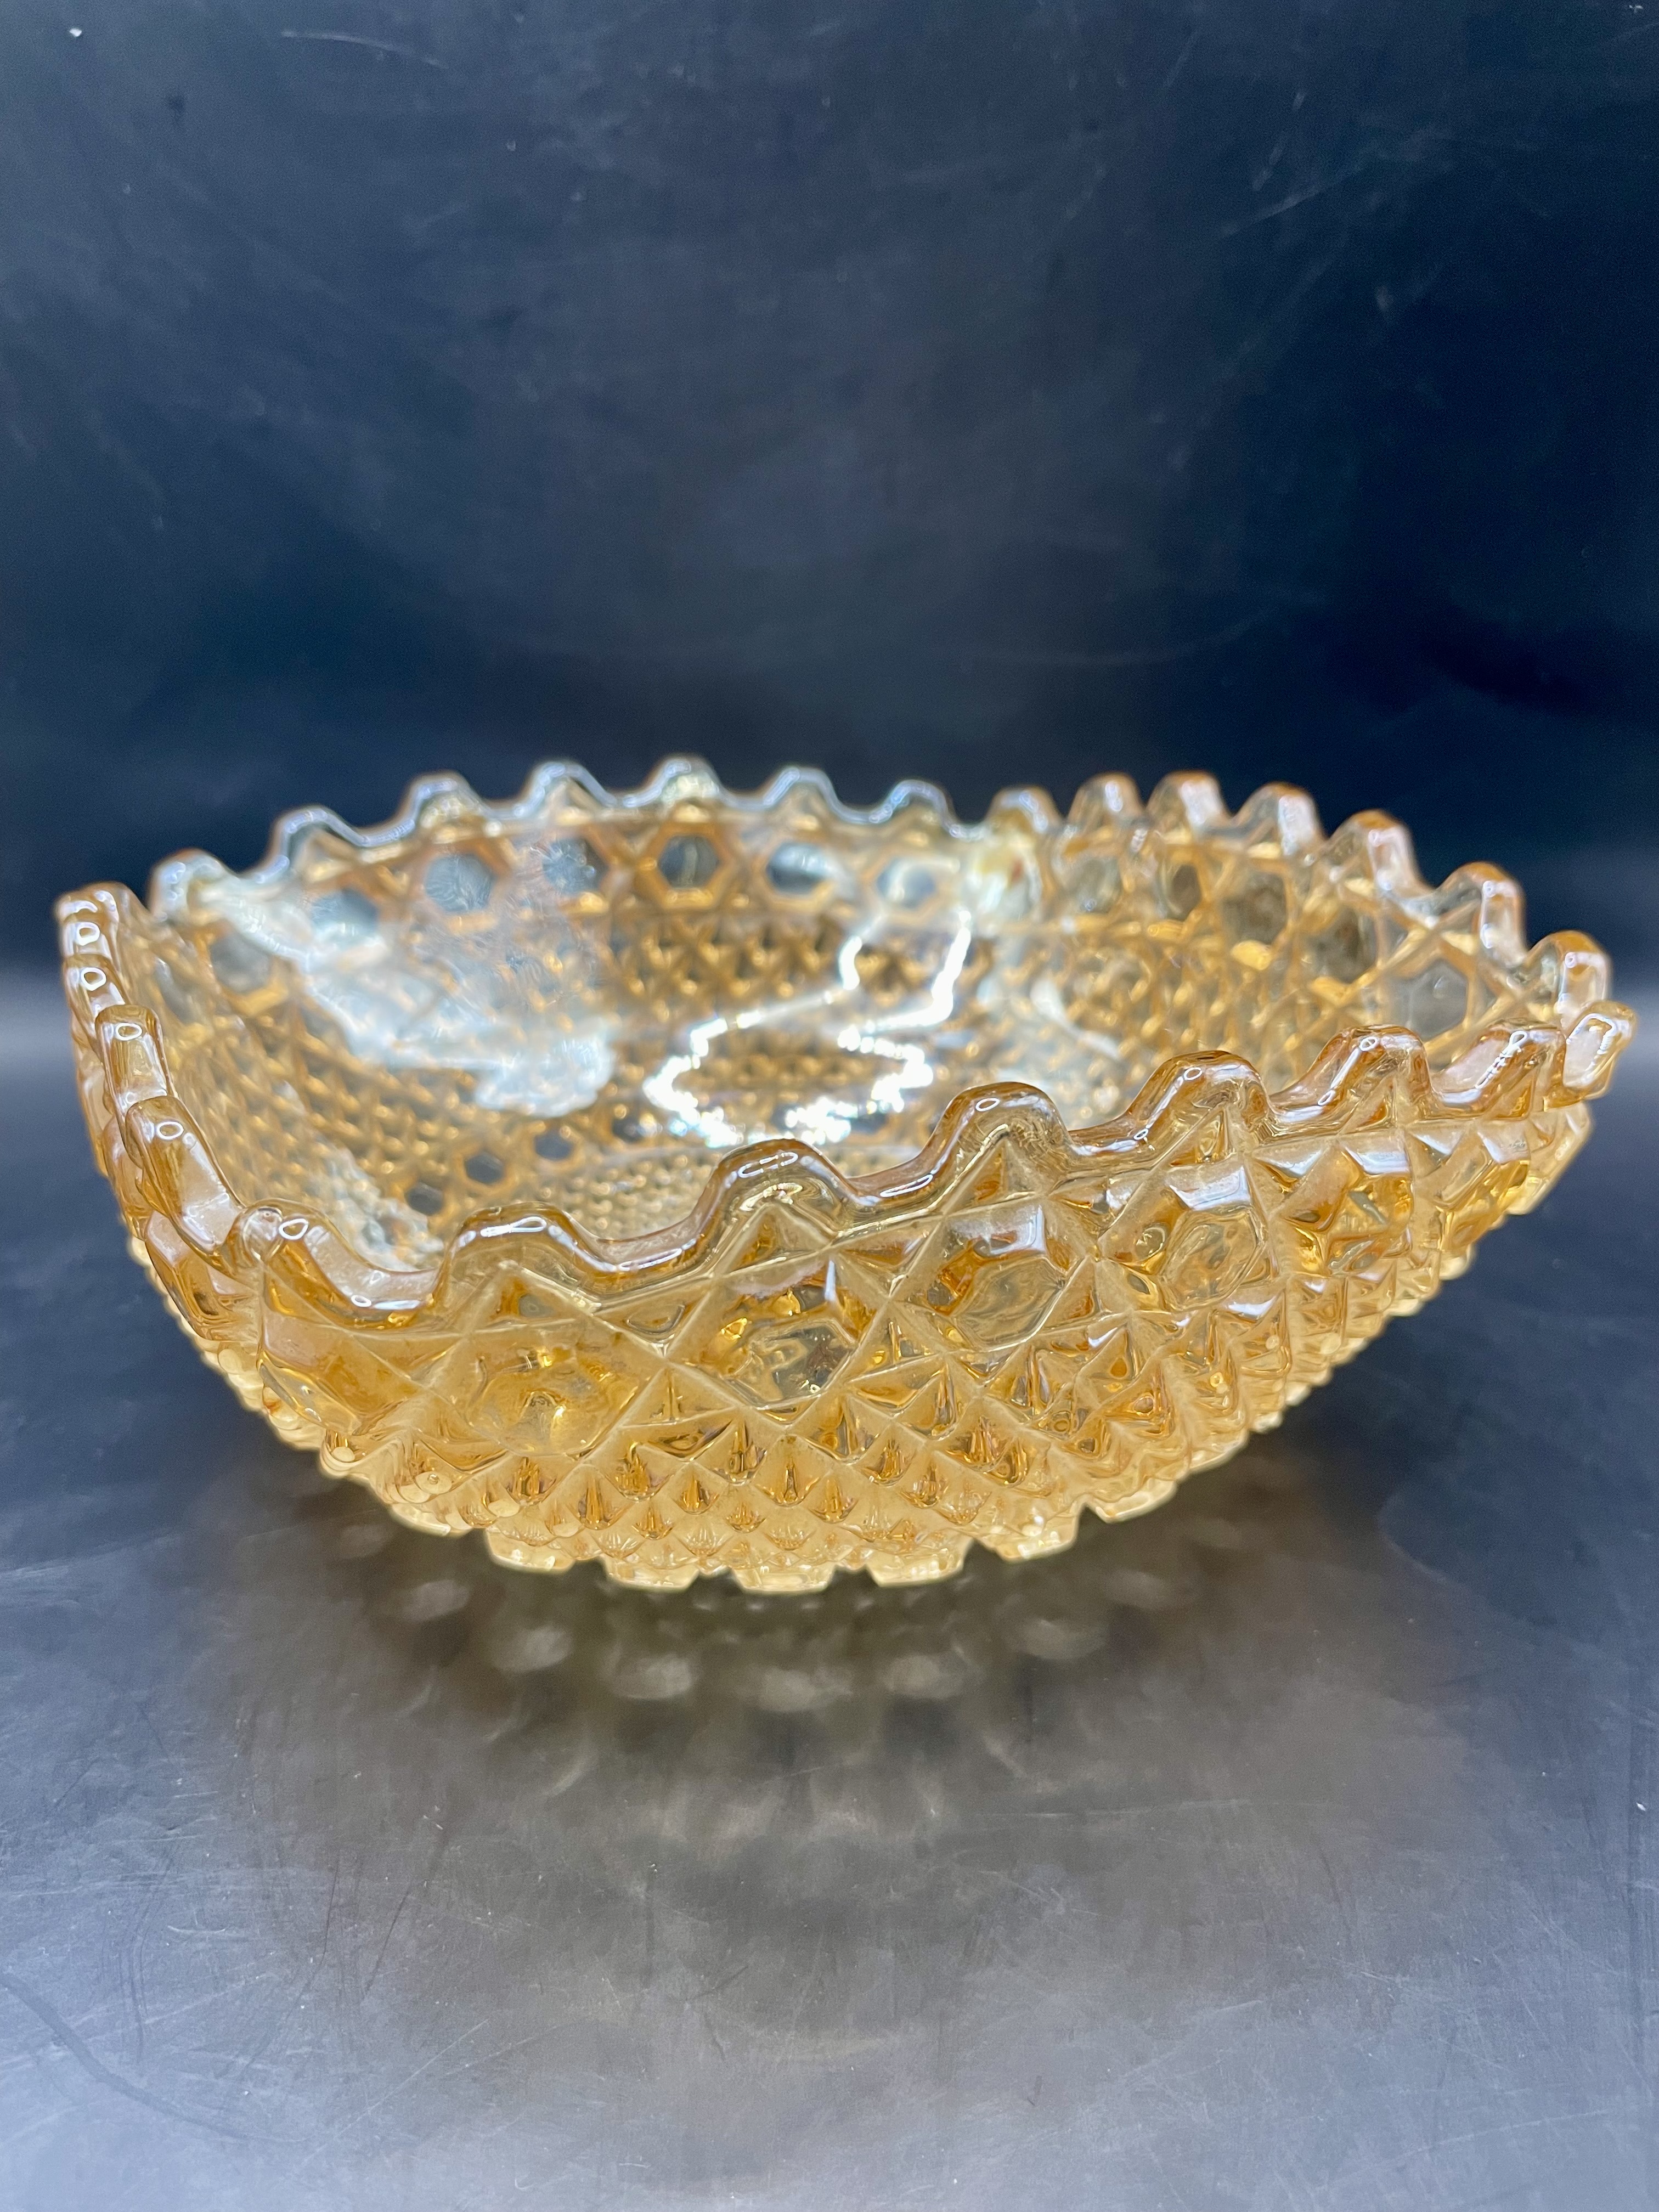 Lovey sowerby glass amber bowl  Great condition no chips or cracks.  - Image 11 of 11